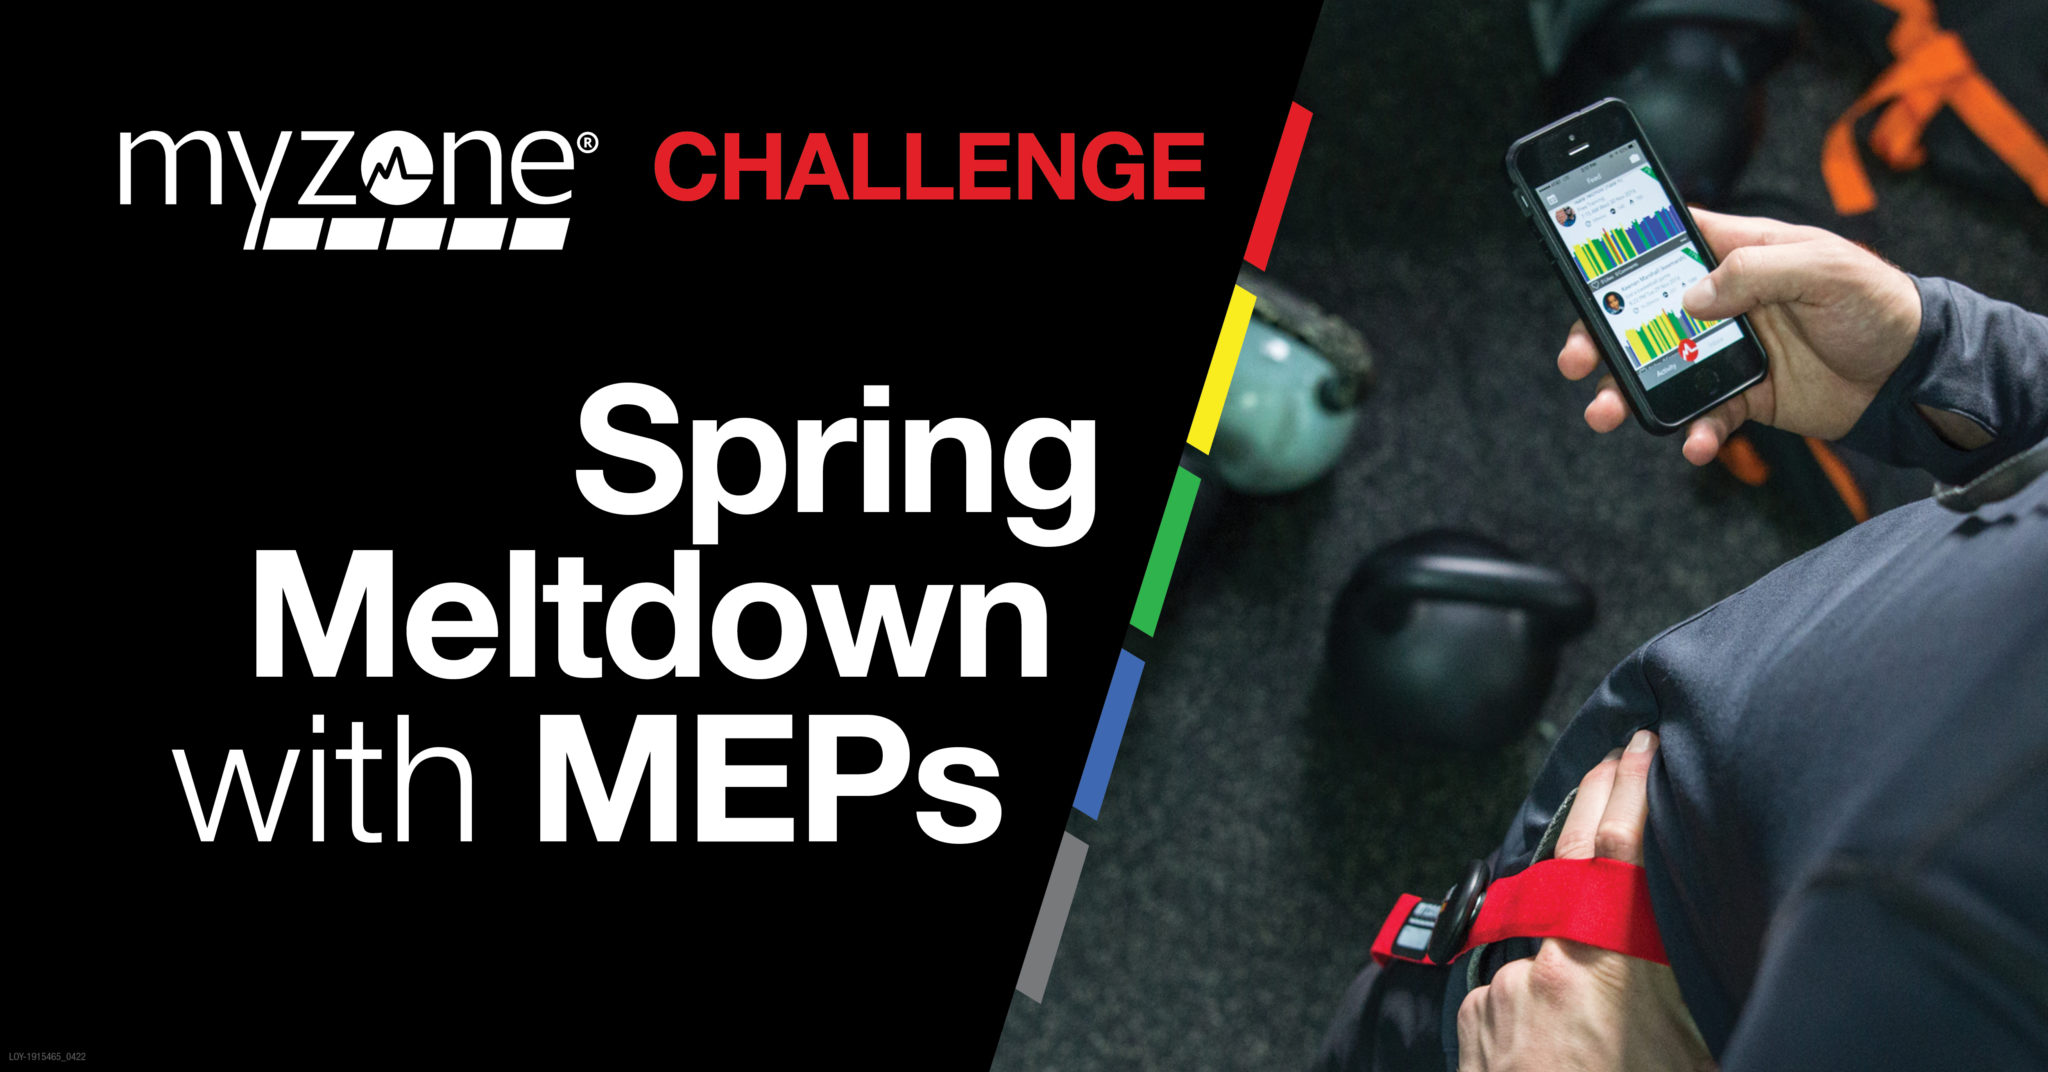 Myzone® Challenge Spring Meltdown with MEPs